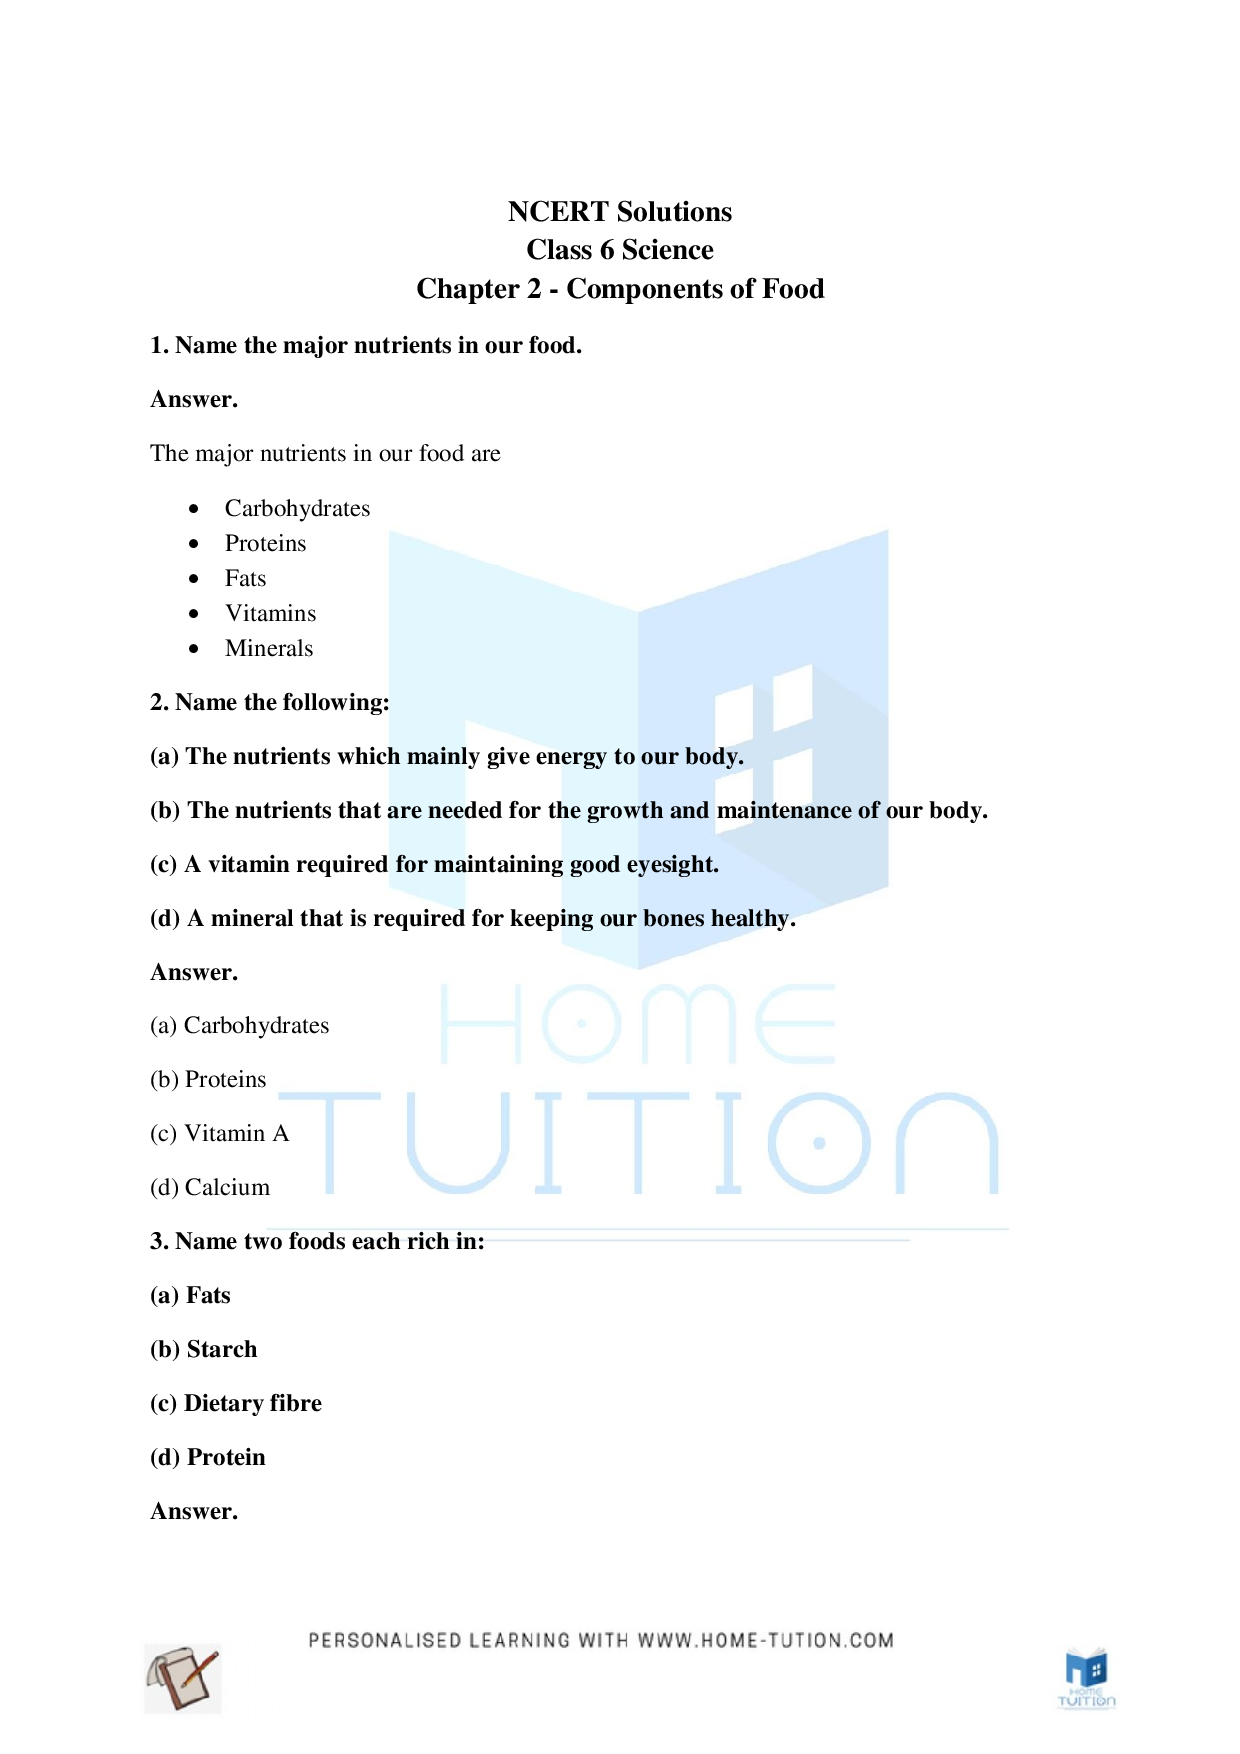 Class 6 Science Chapter 2 Components of Food